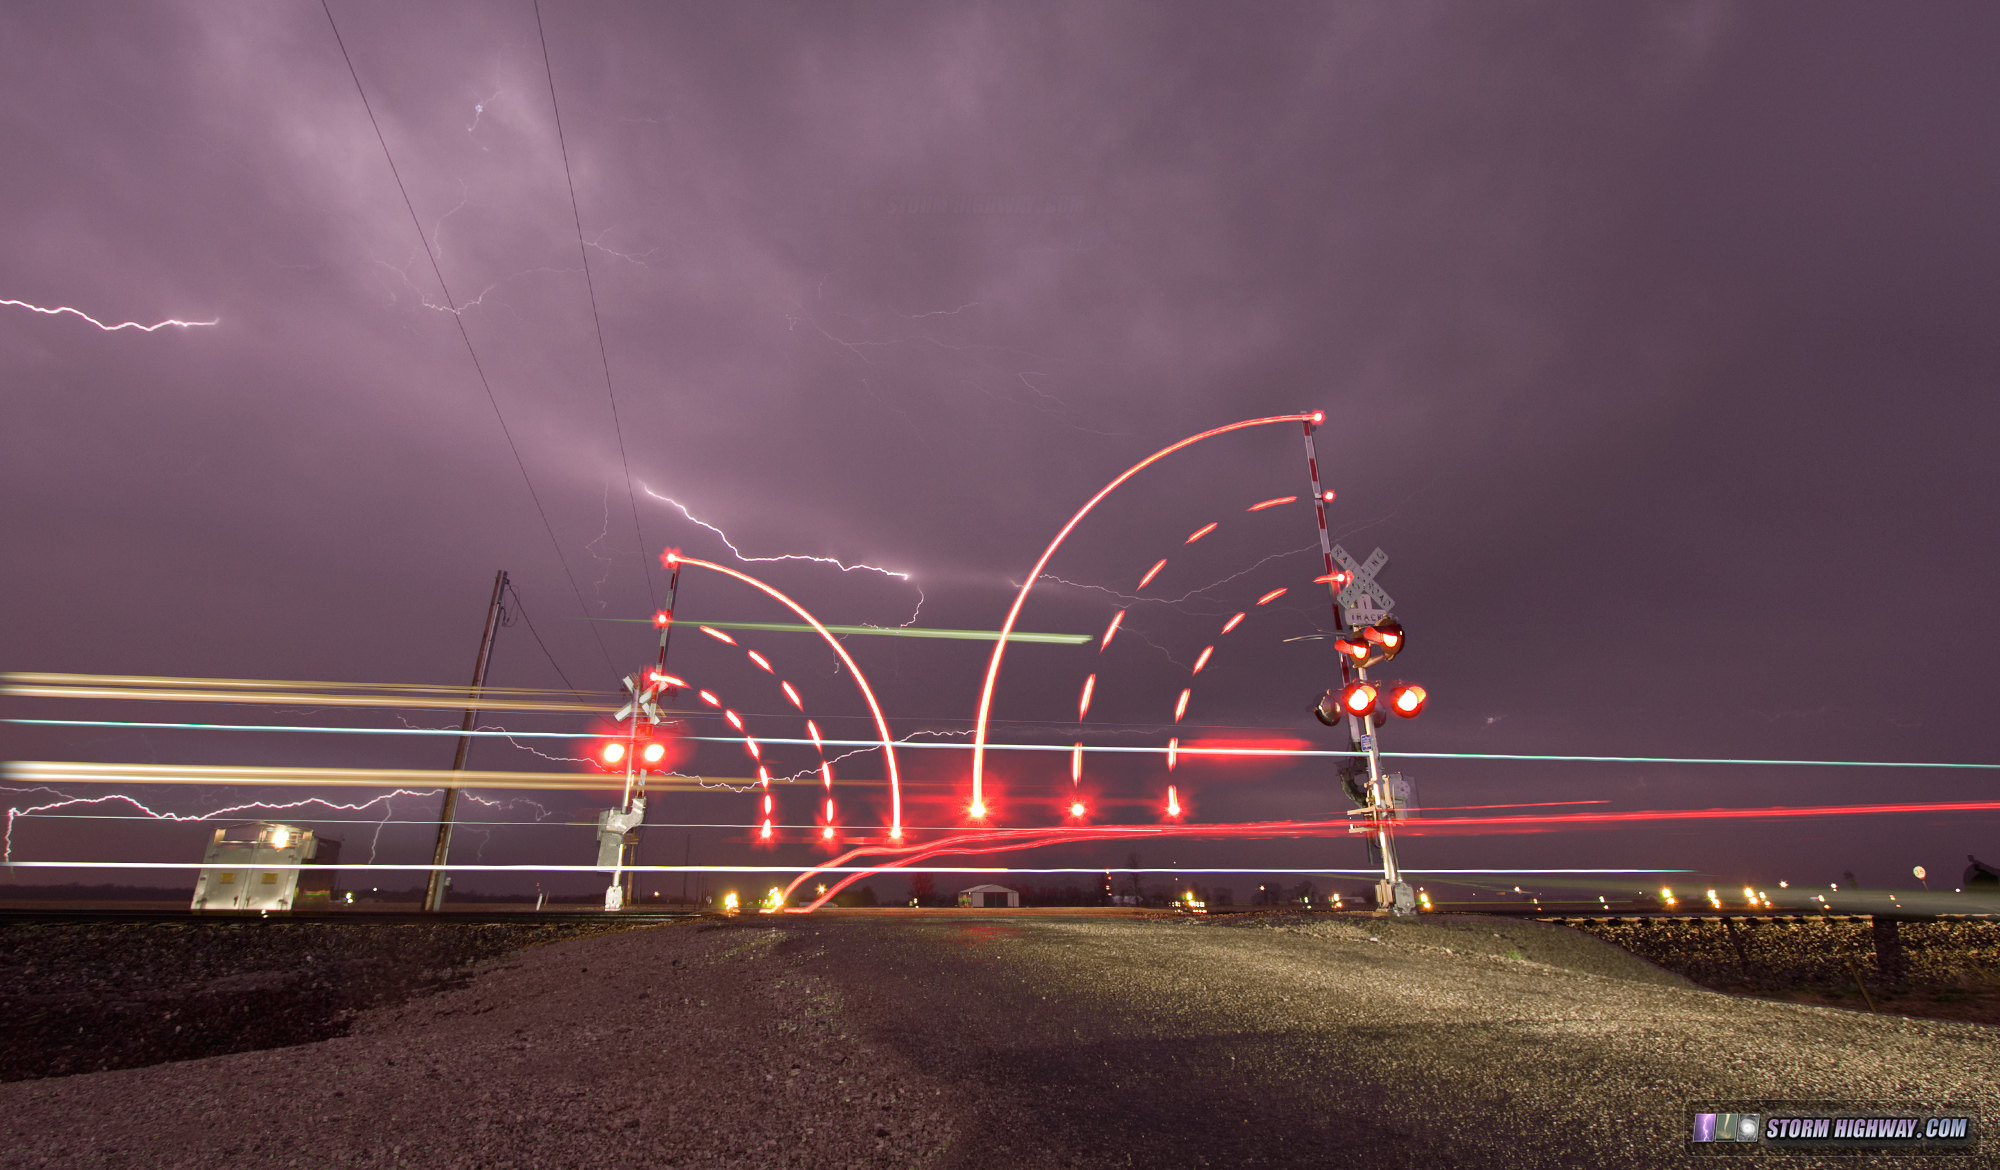 Lightning over a railroad crossing near Albers, IL - March 25, 2015